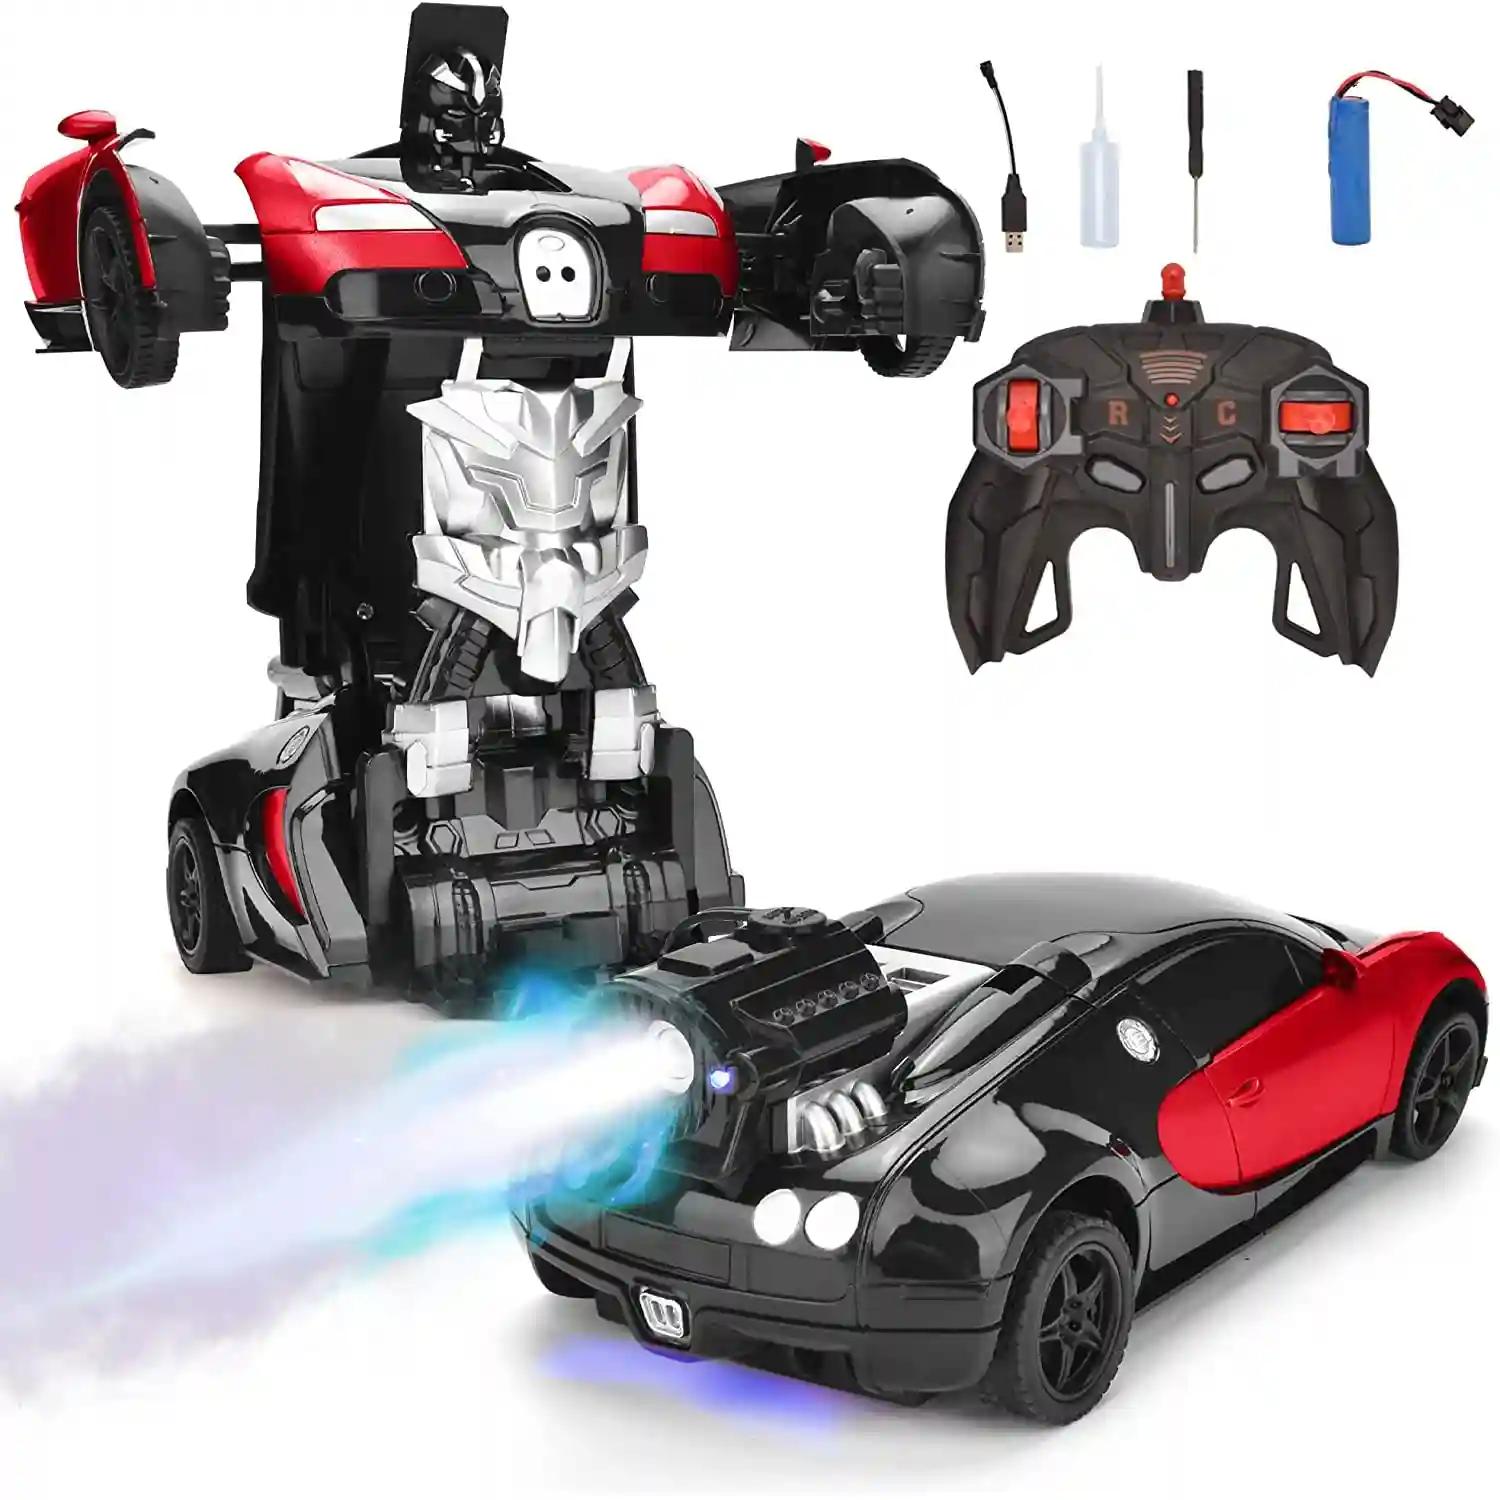 PAPASpace Remote Control Transform Robot Car 2in1 Convertible Car Toy for Kids with Rechargeable Battery & Water Boost Spray